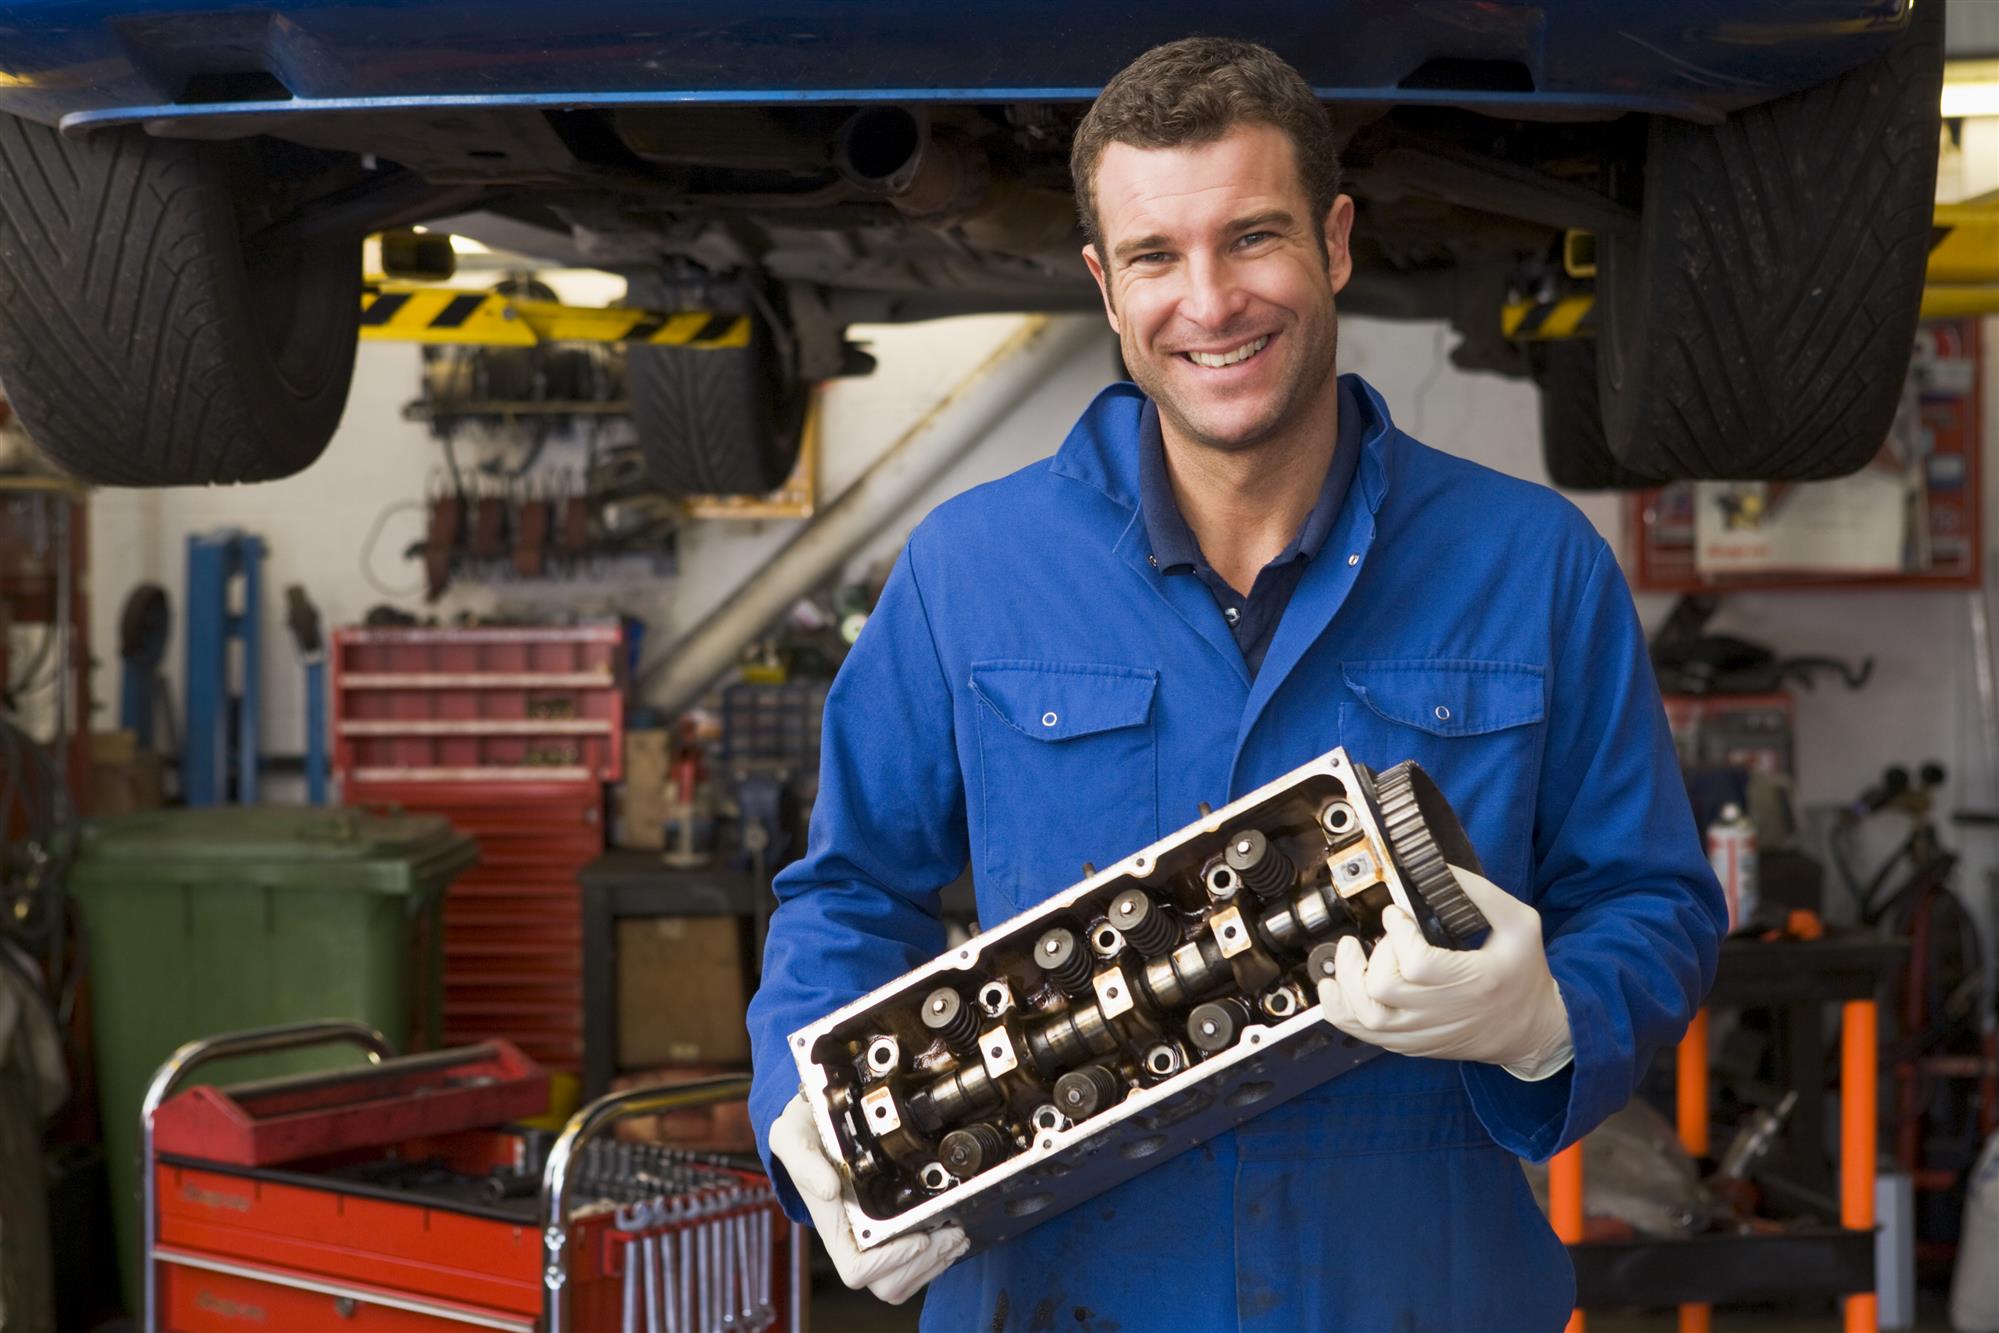 Motors Gives Auto Parts Greater Exposure to Repair Shops